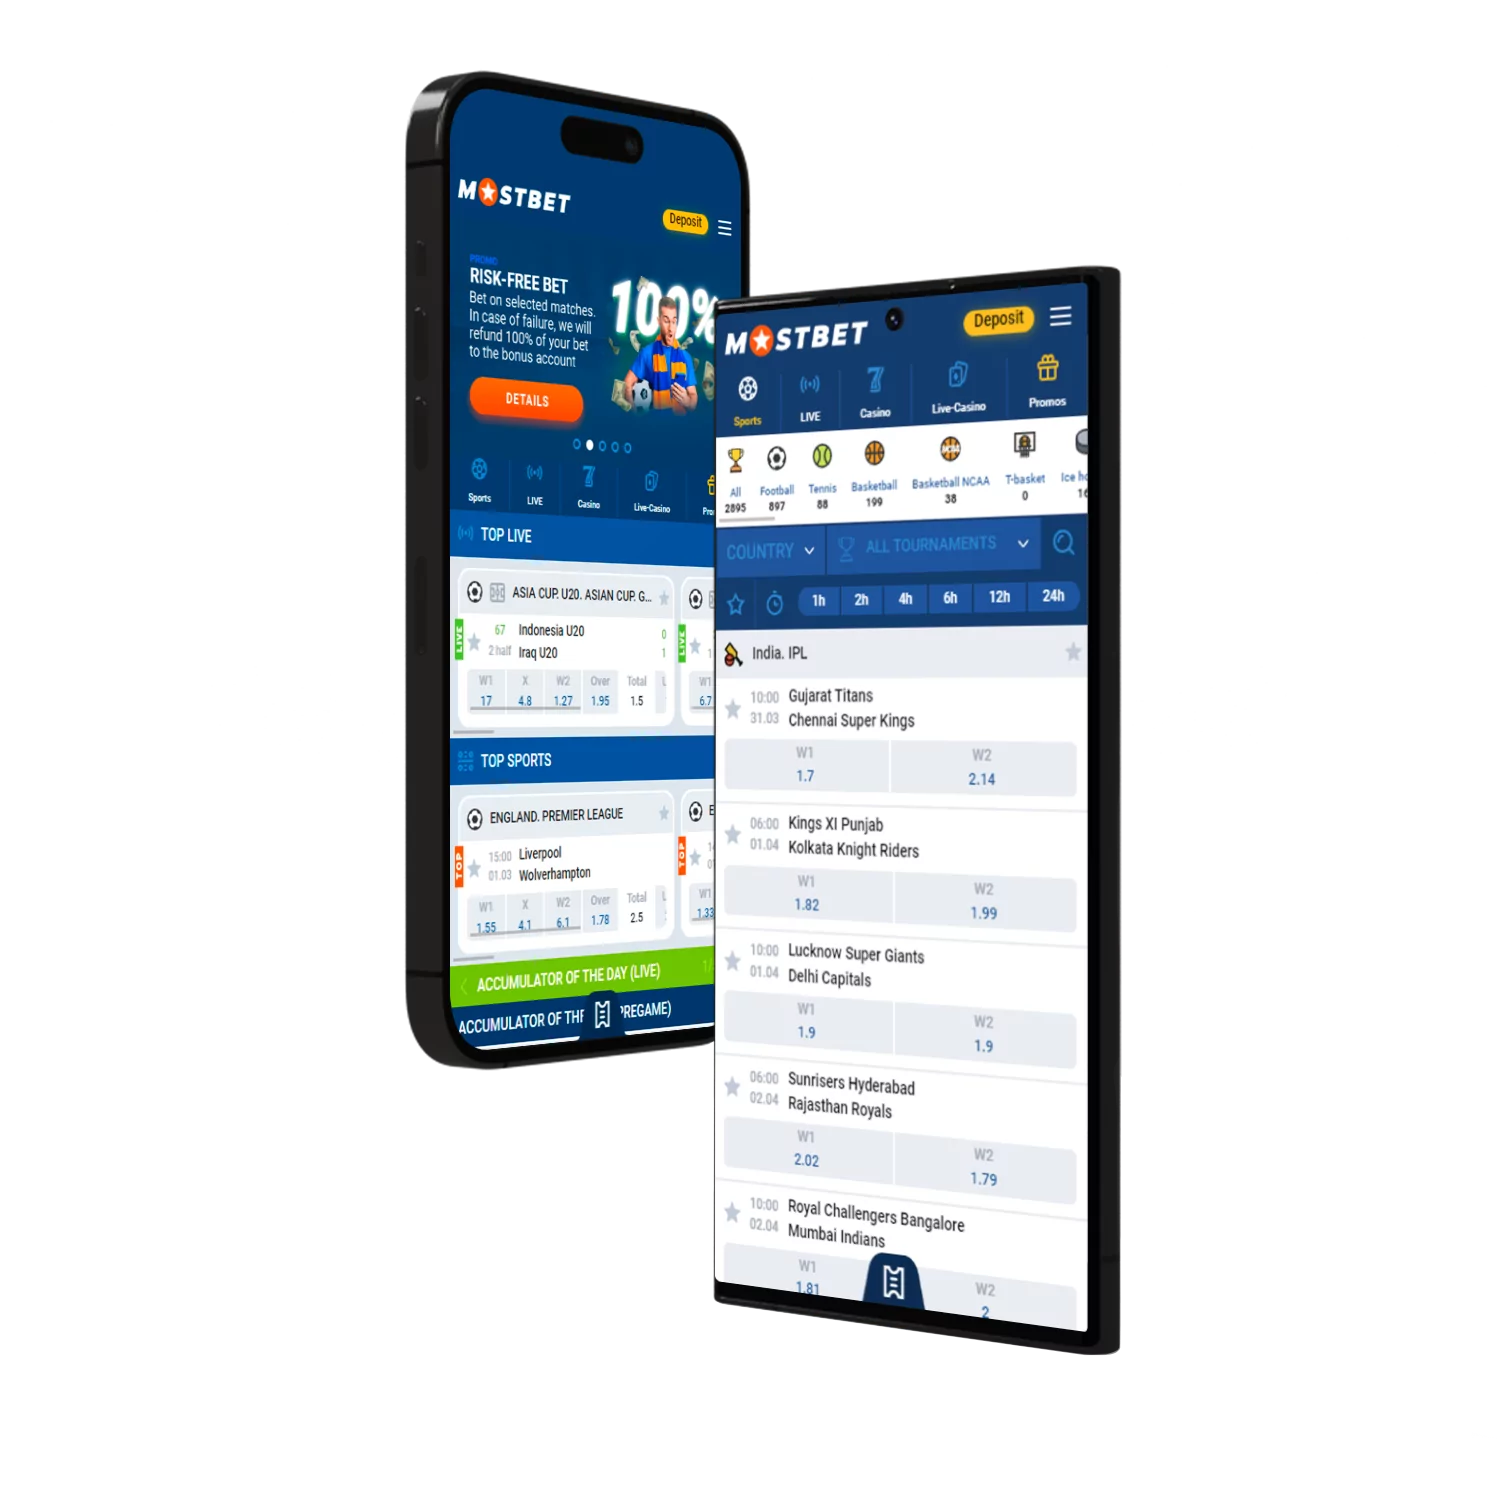 You can use the Mostbet app legally on your Android or iOS device.